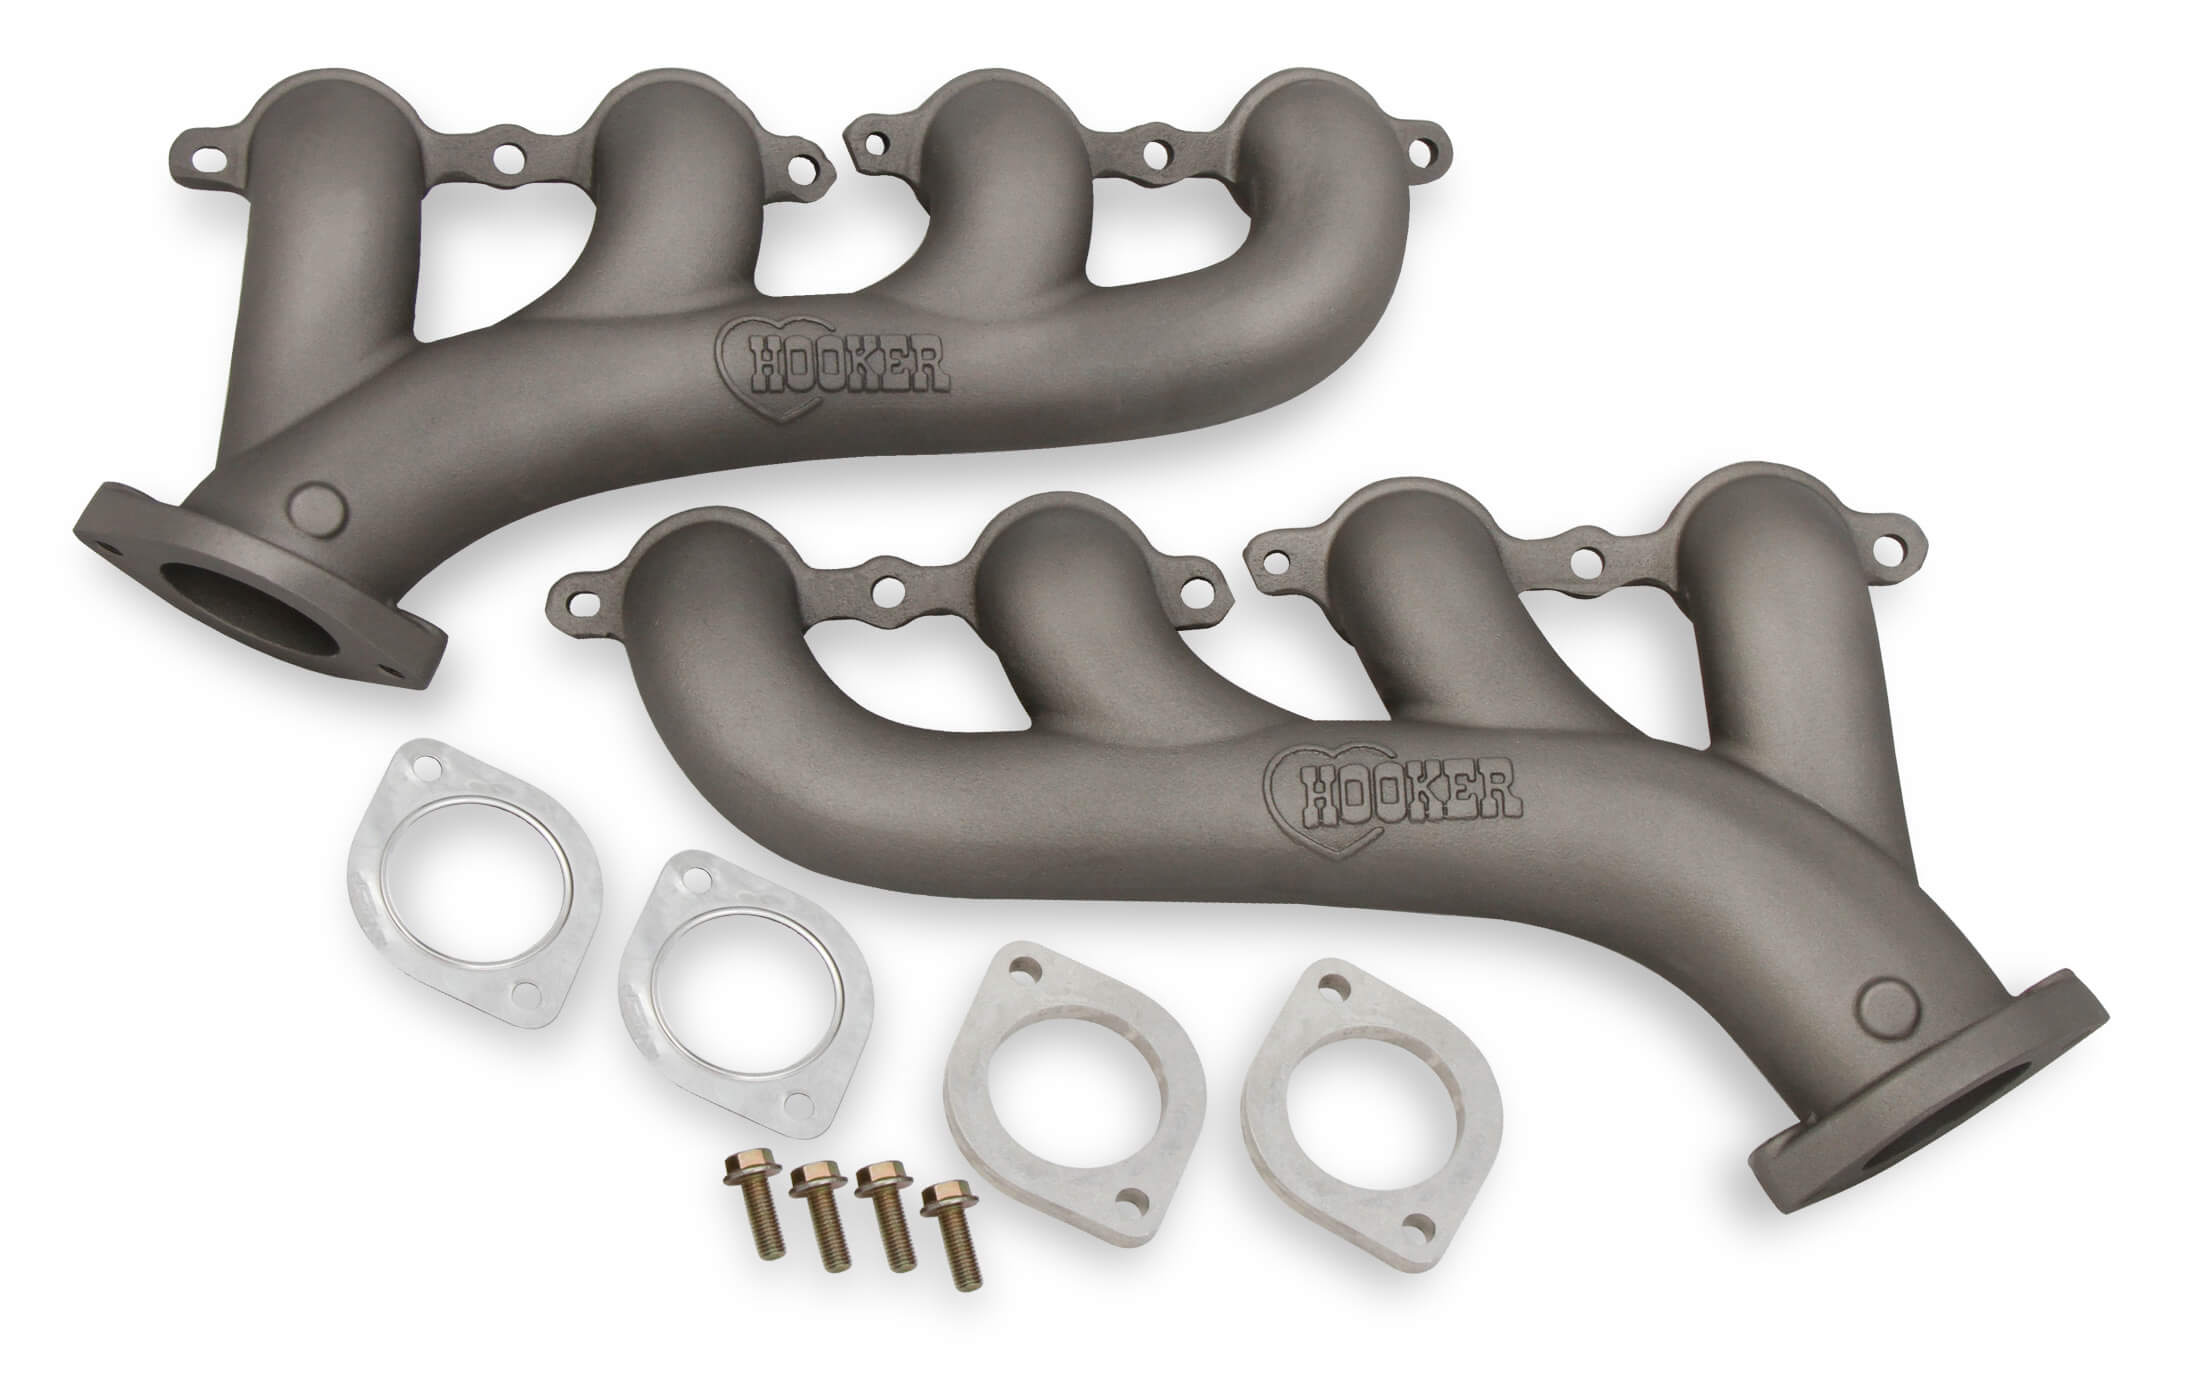 GM LS Series Hooker Headers Exhaust Manifolds w/2.5" Outlet - Titanium Ceramic Finish